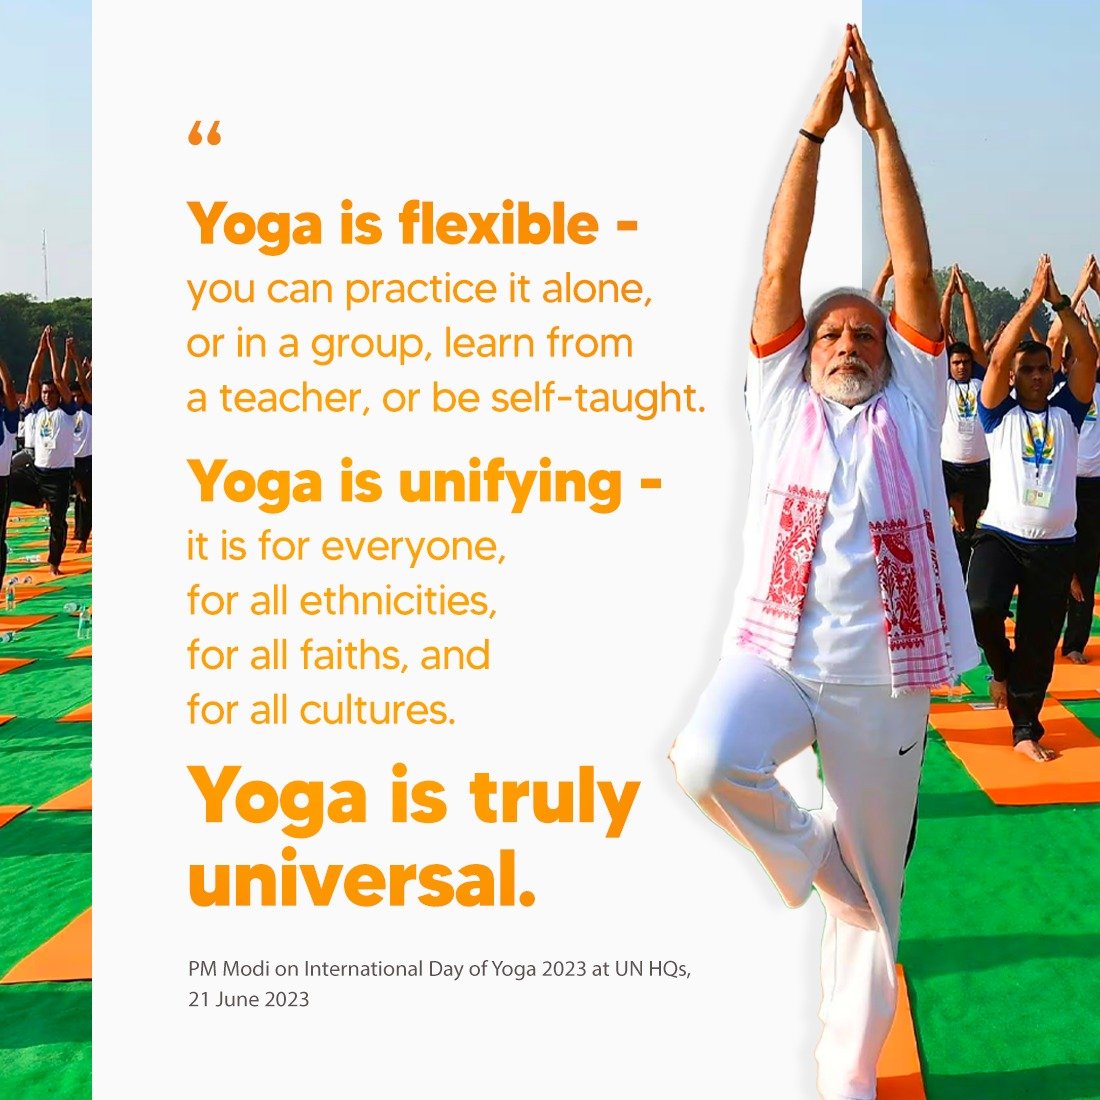 Yoga is truly universal.